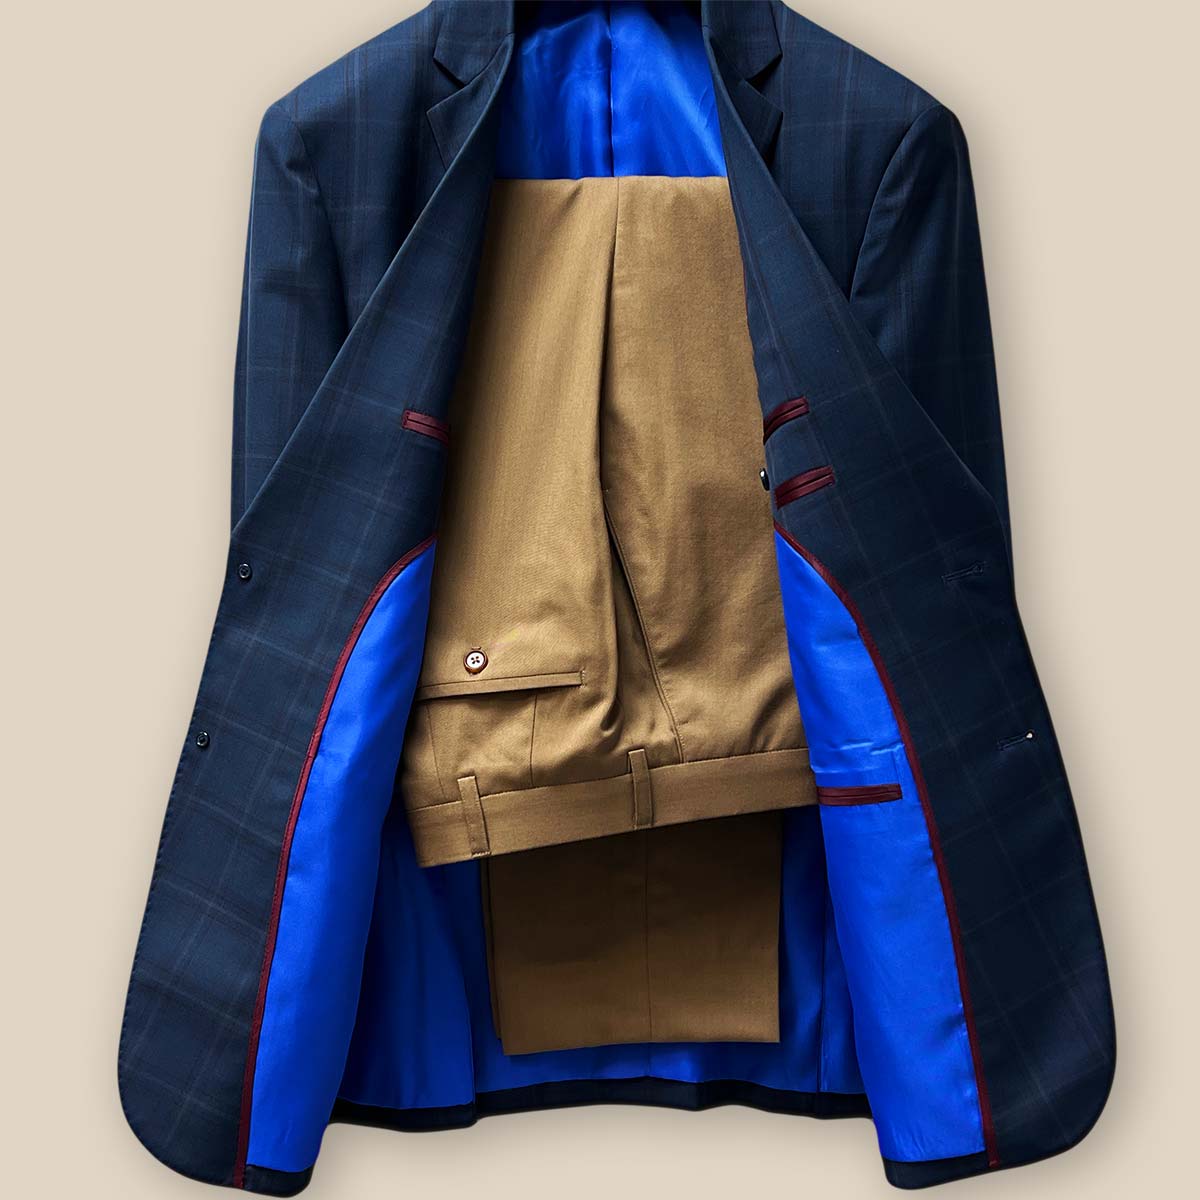 Front view of the two-piece set featuring the dark midnight blue sportcoat paired with tan trousers.